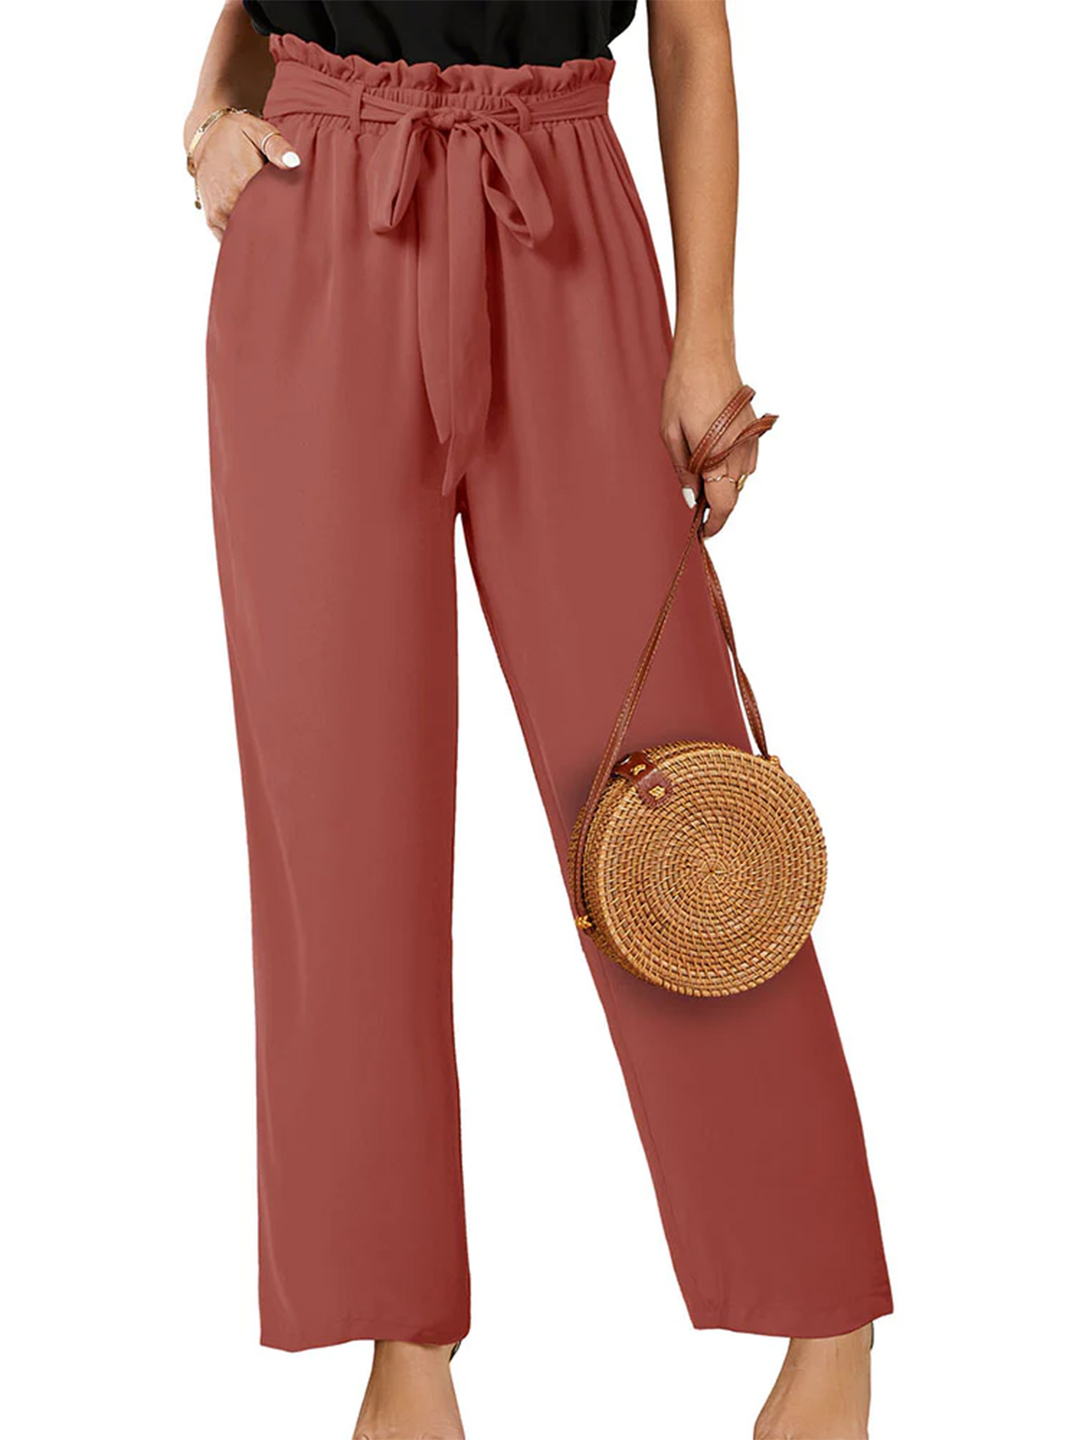 Women's High Waisted Palazzo Pants Belted Wide Leg Long Trousers